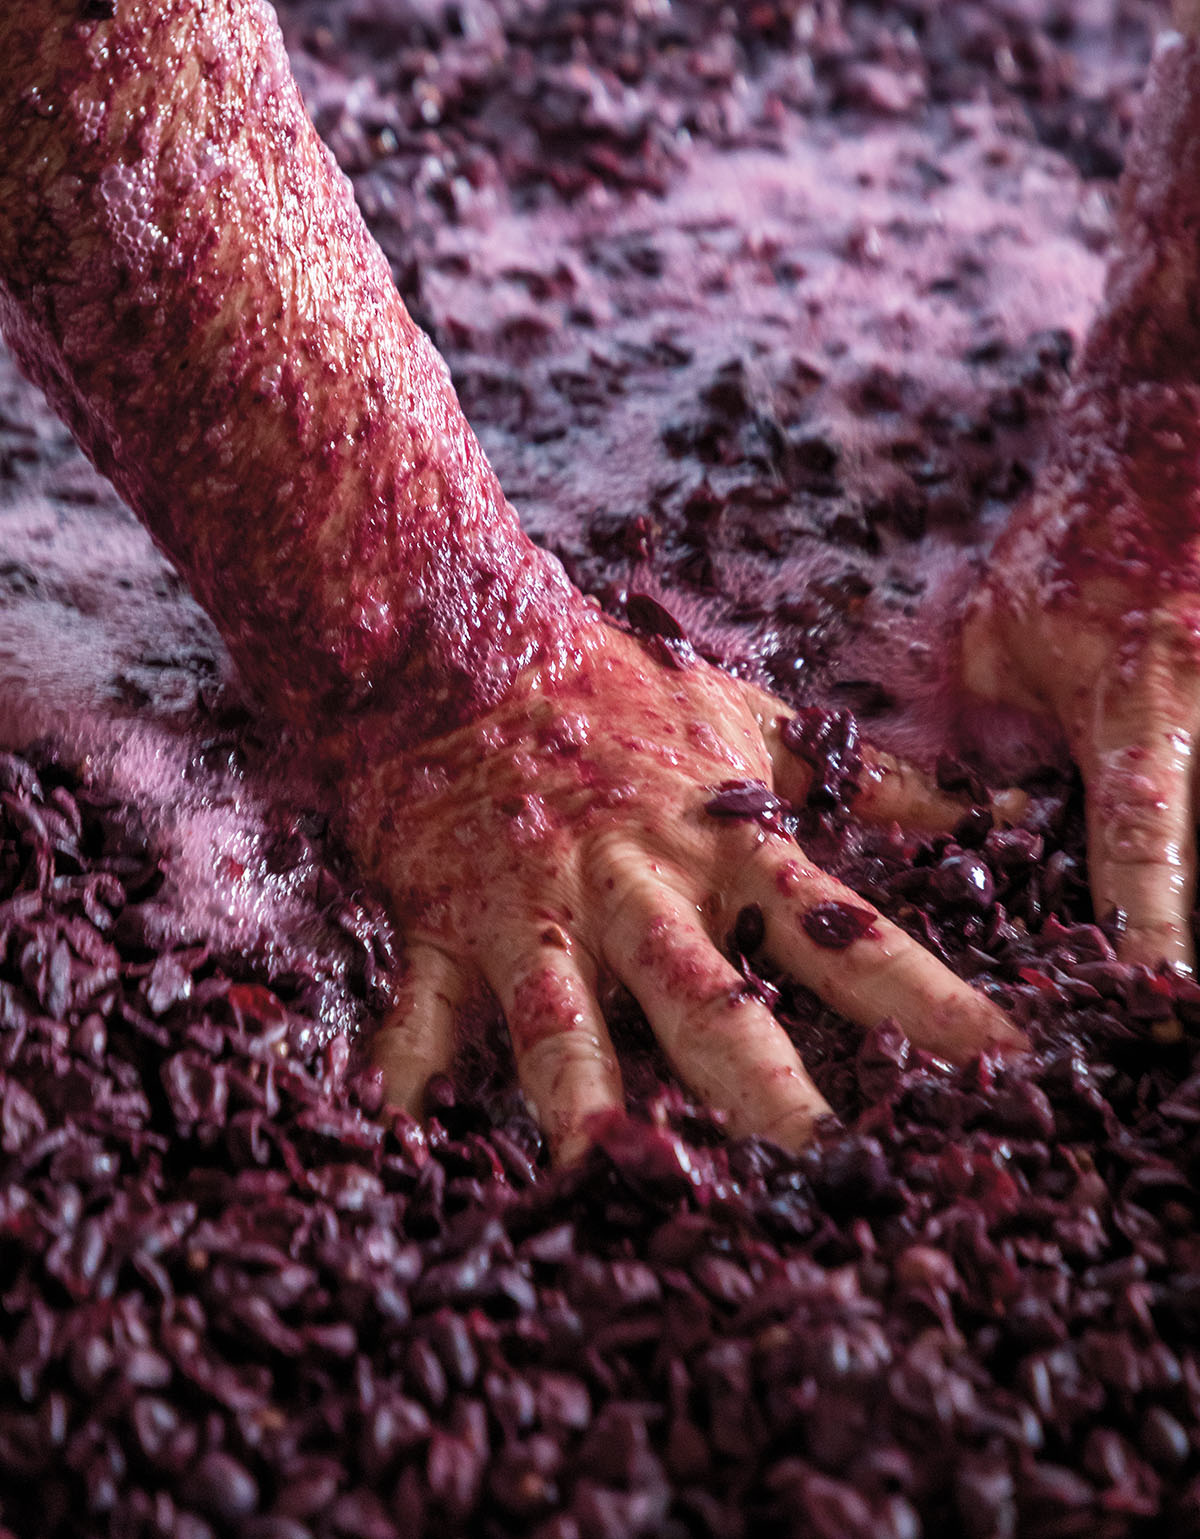 A person moves their purple-stained hands through a barrel of crushed and fermented grapes